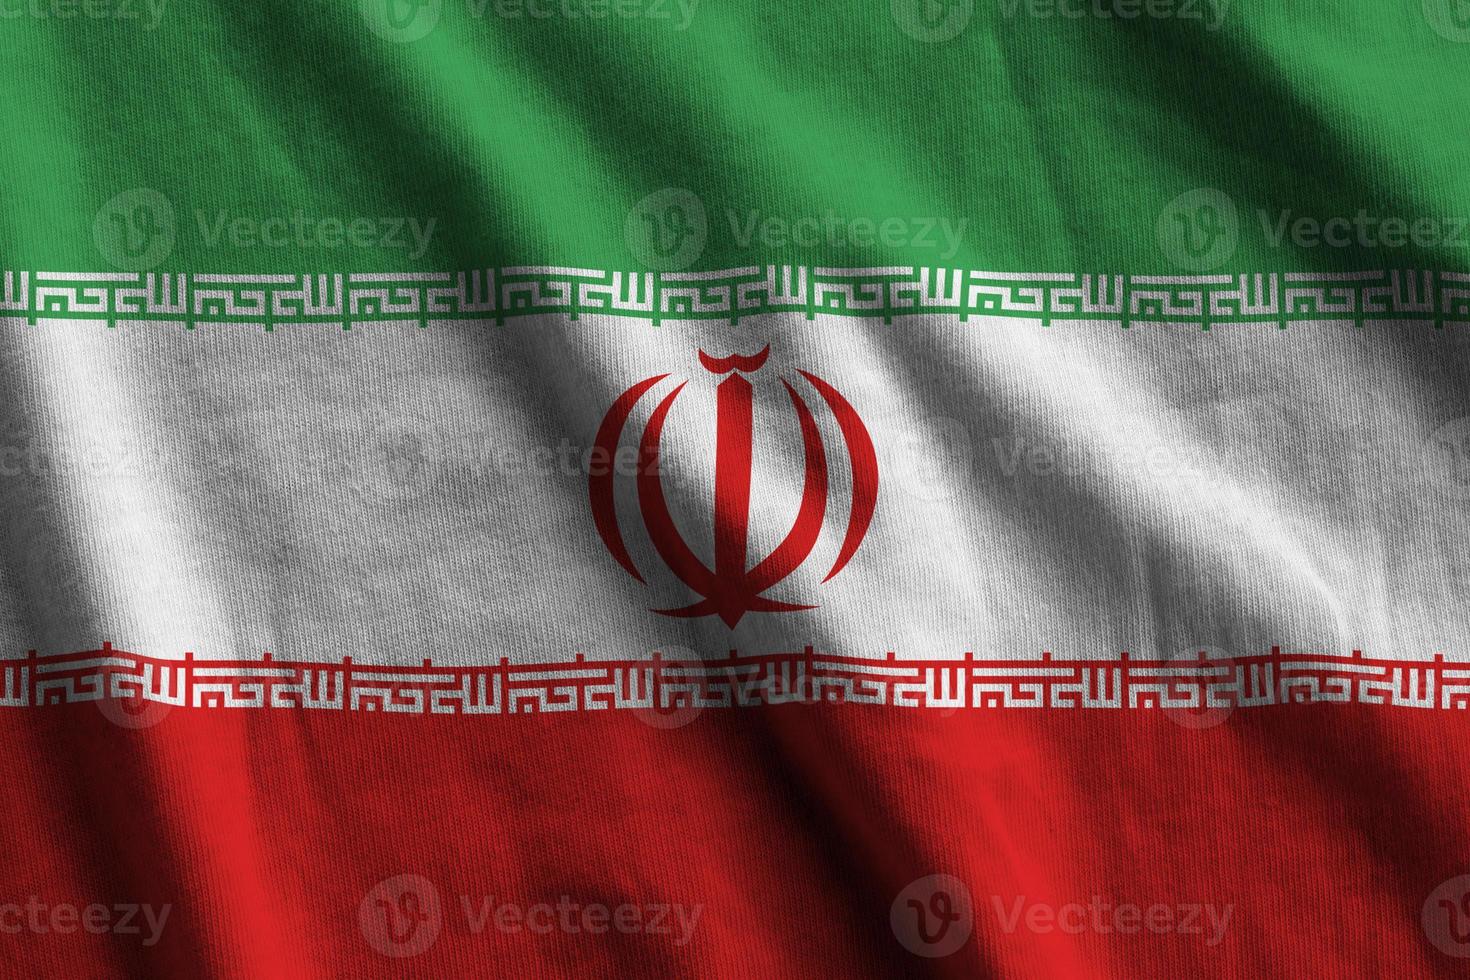 Iran flag with big folds waving close up under the studio light indoors. The official symbols and colors in banner photo